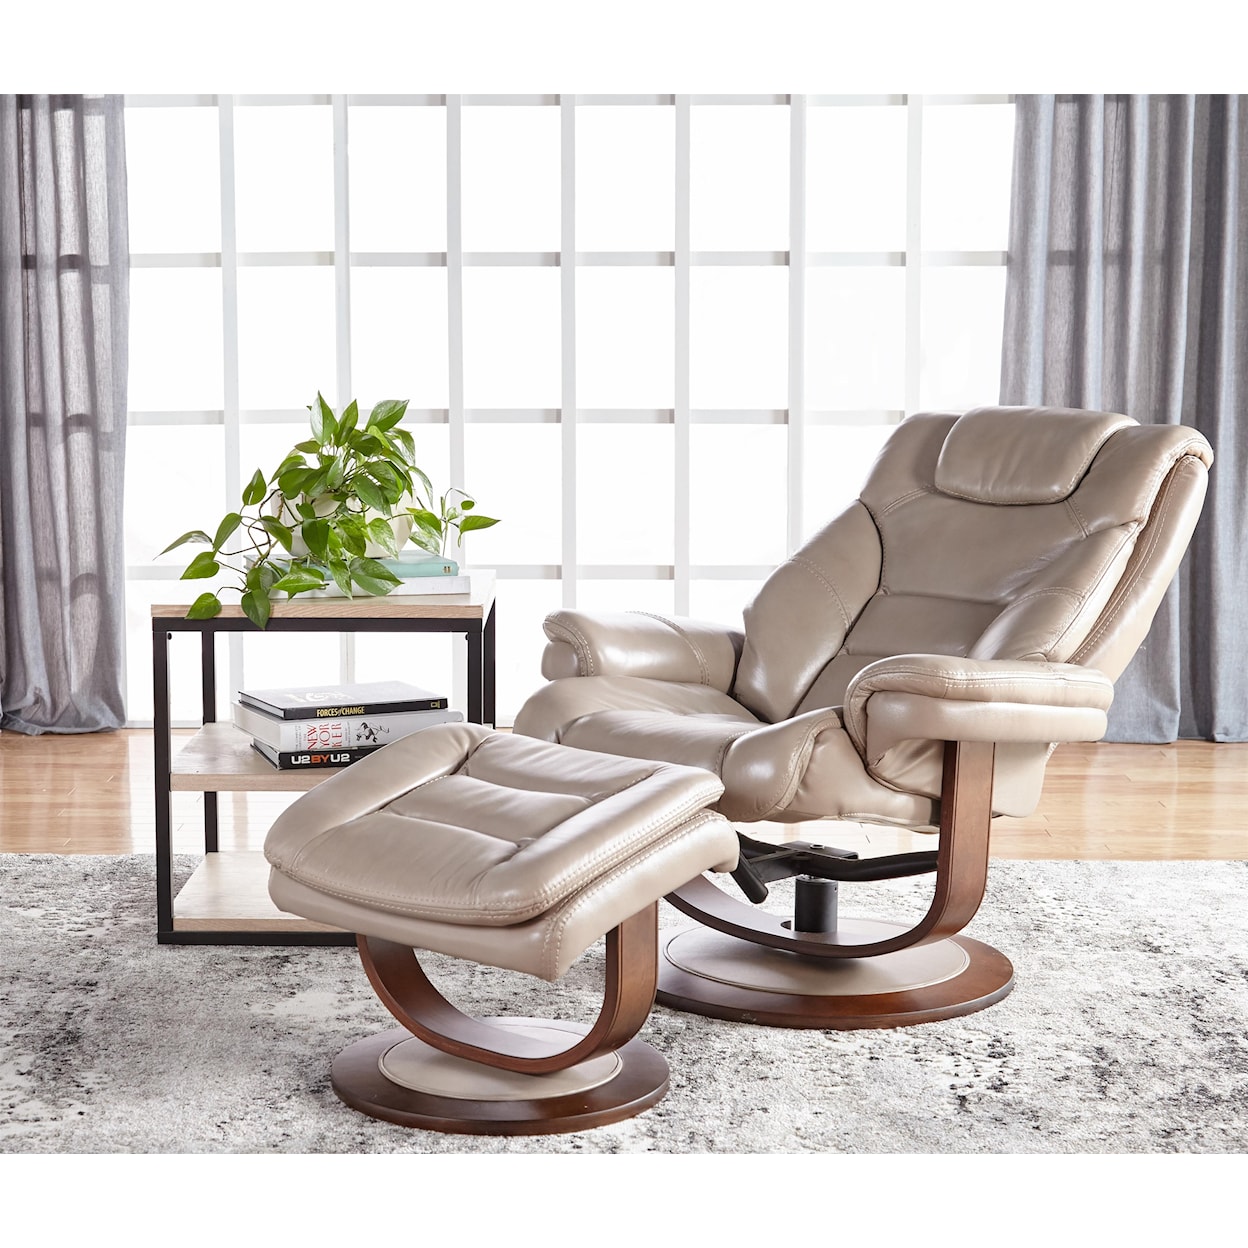 Cheers Issac - Oyster Issac Chair and Ottoman